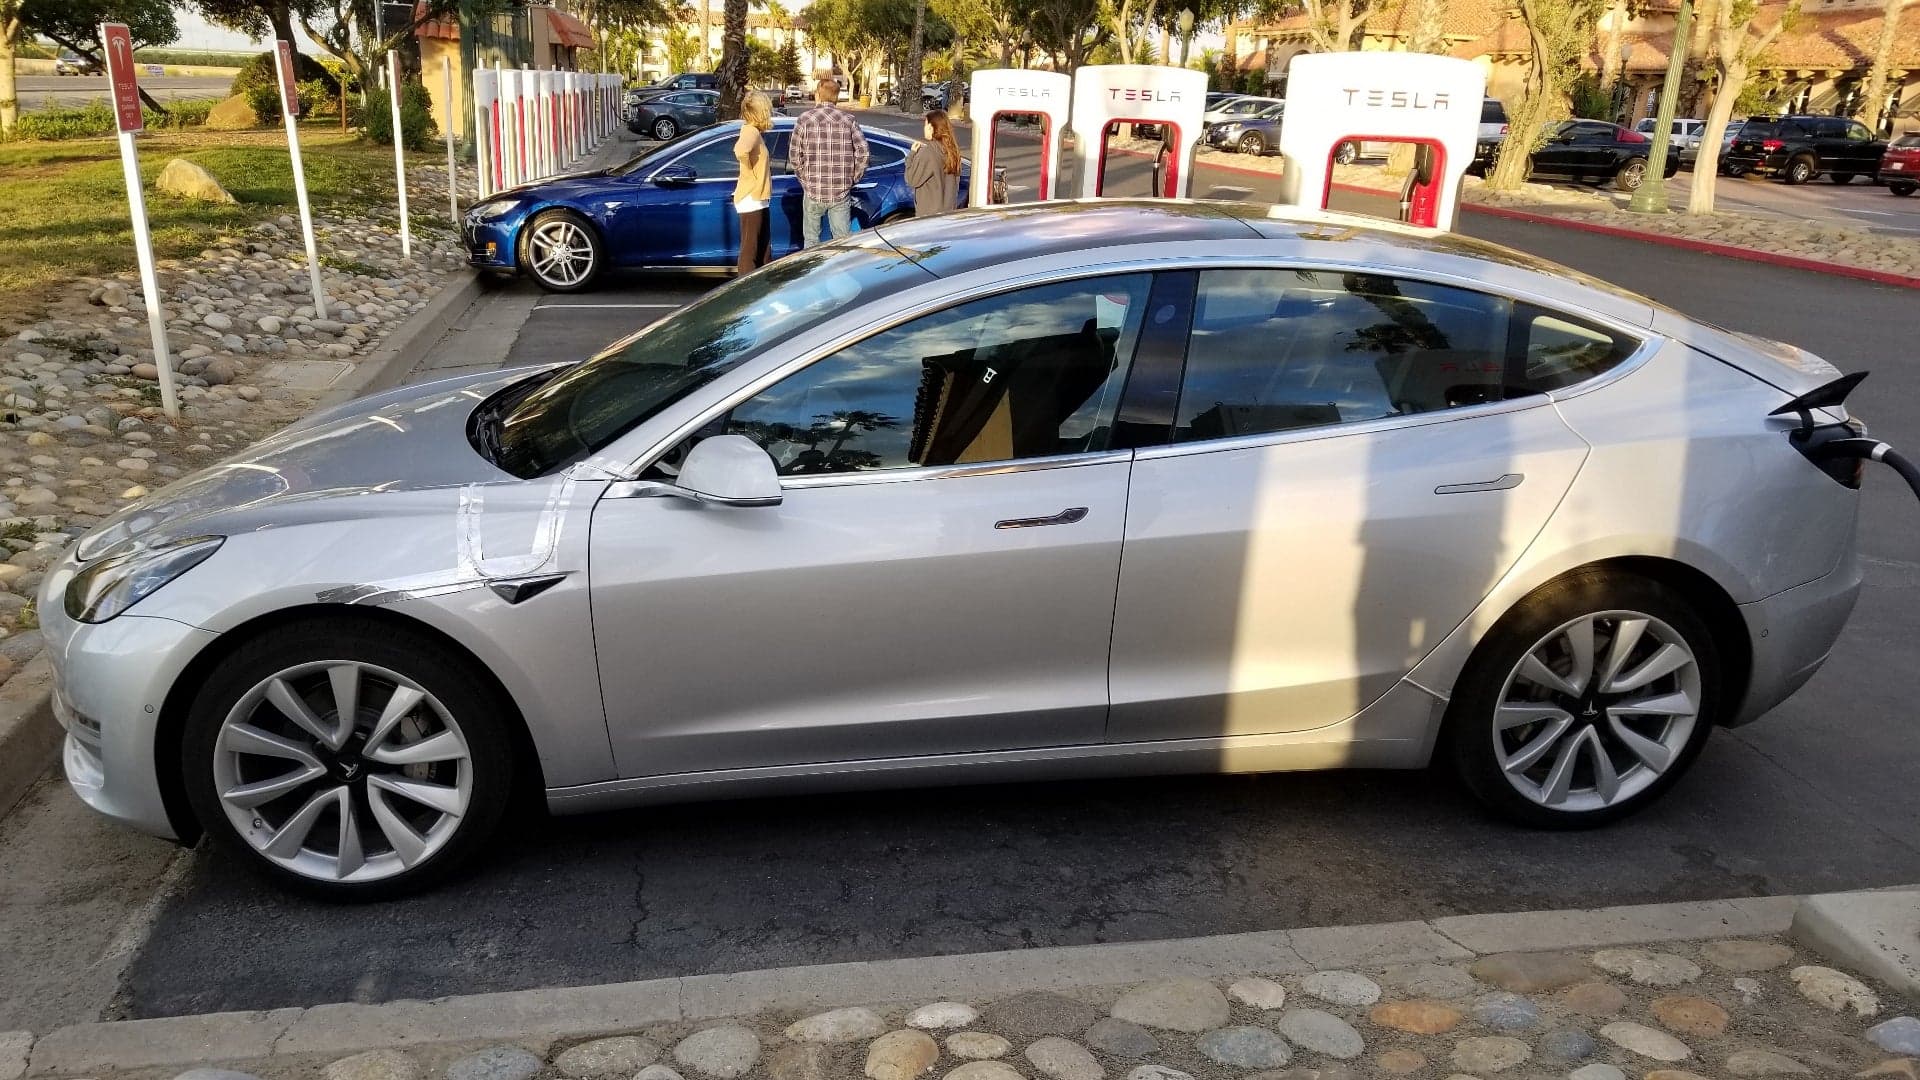 Undisguised Tesla Model 3 Spotted at California Supercharger